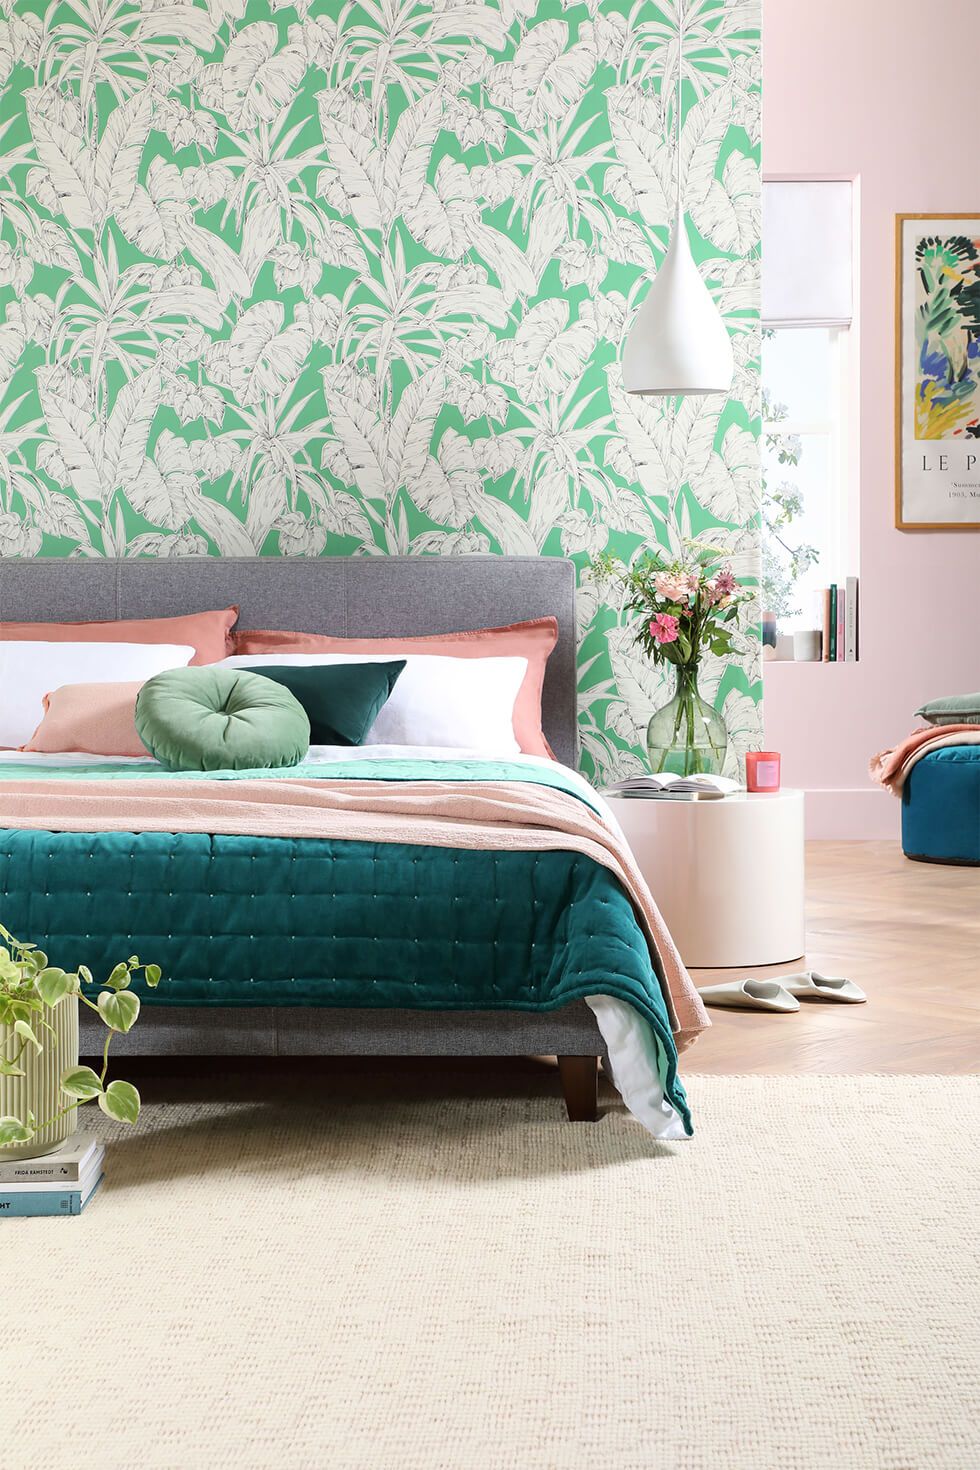 Bedroom with tropical green wallpaper and fabric bed